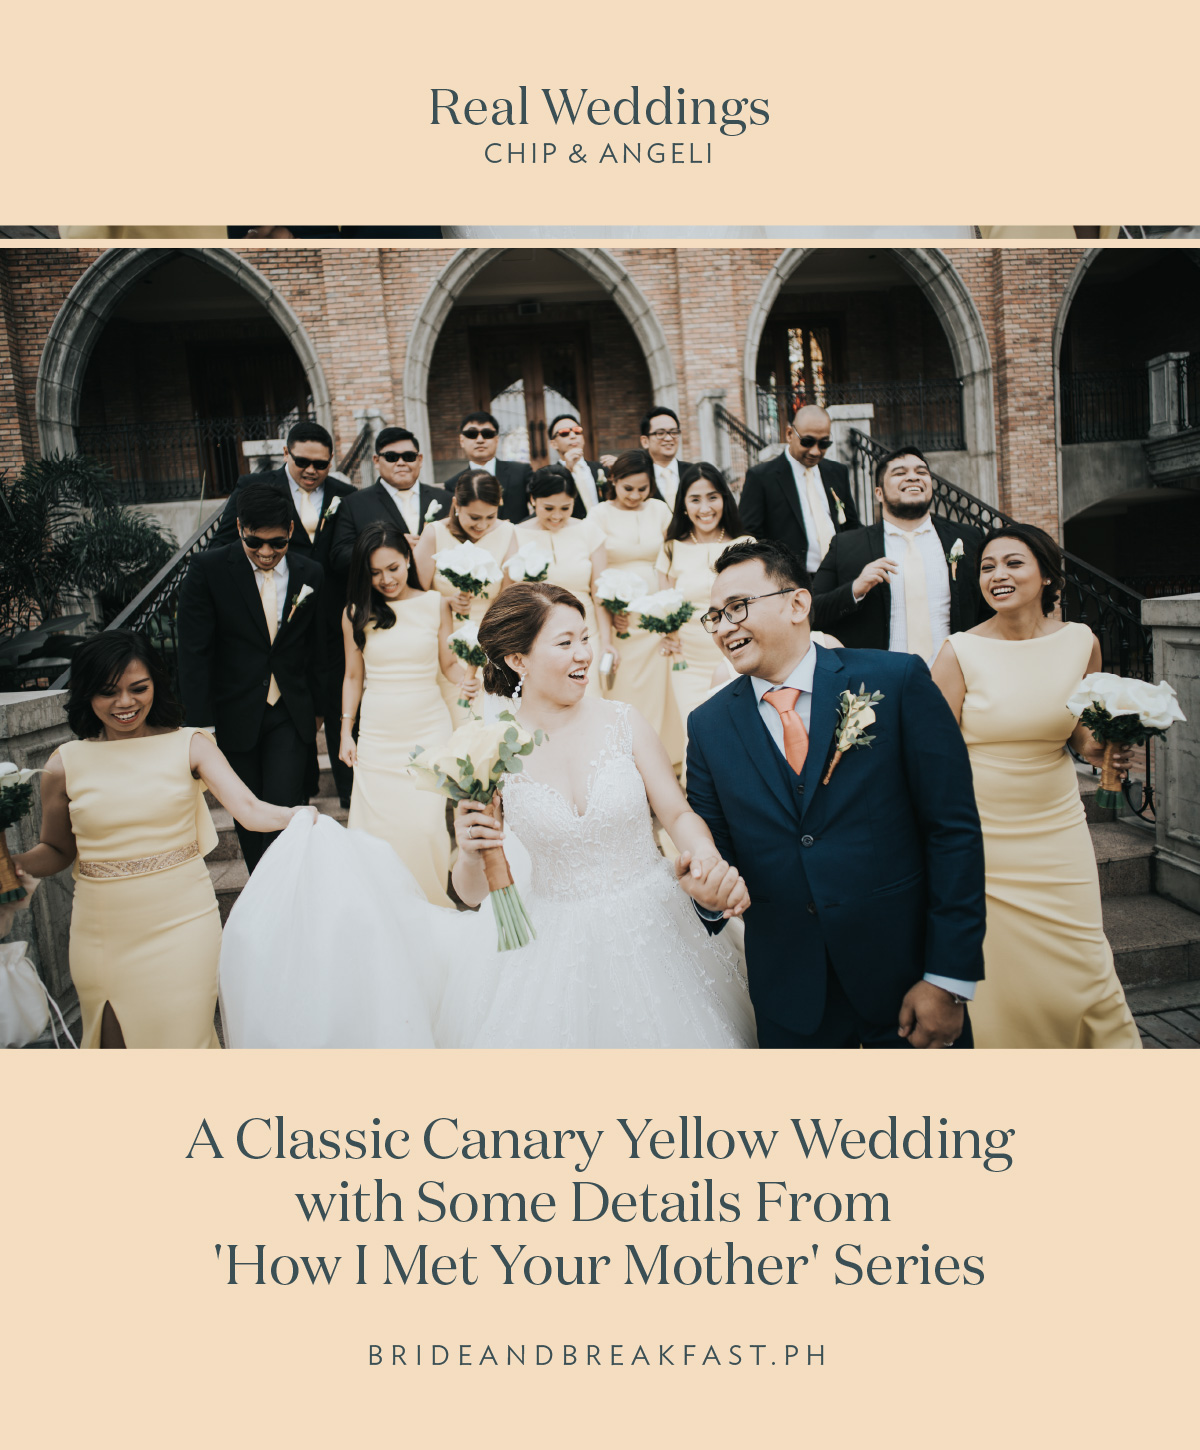 A Classic Canary Yellow Wedding with Some Details From 'How I Met Your Mother' Series